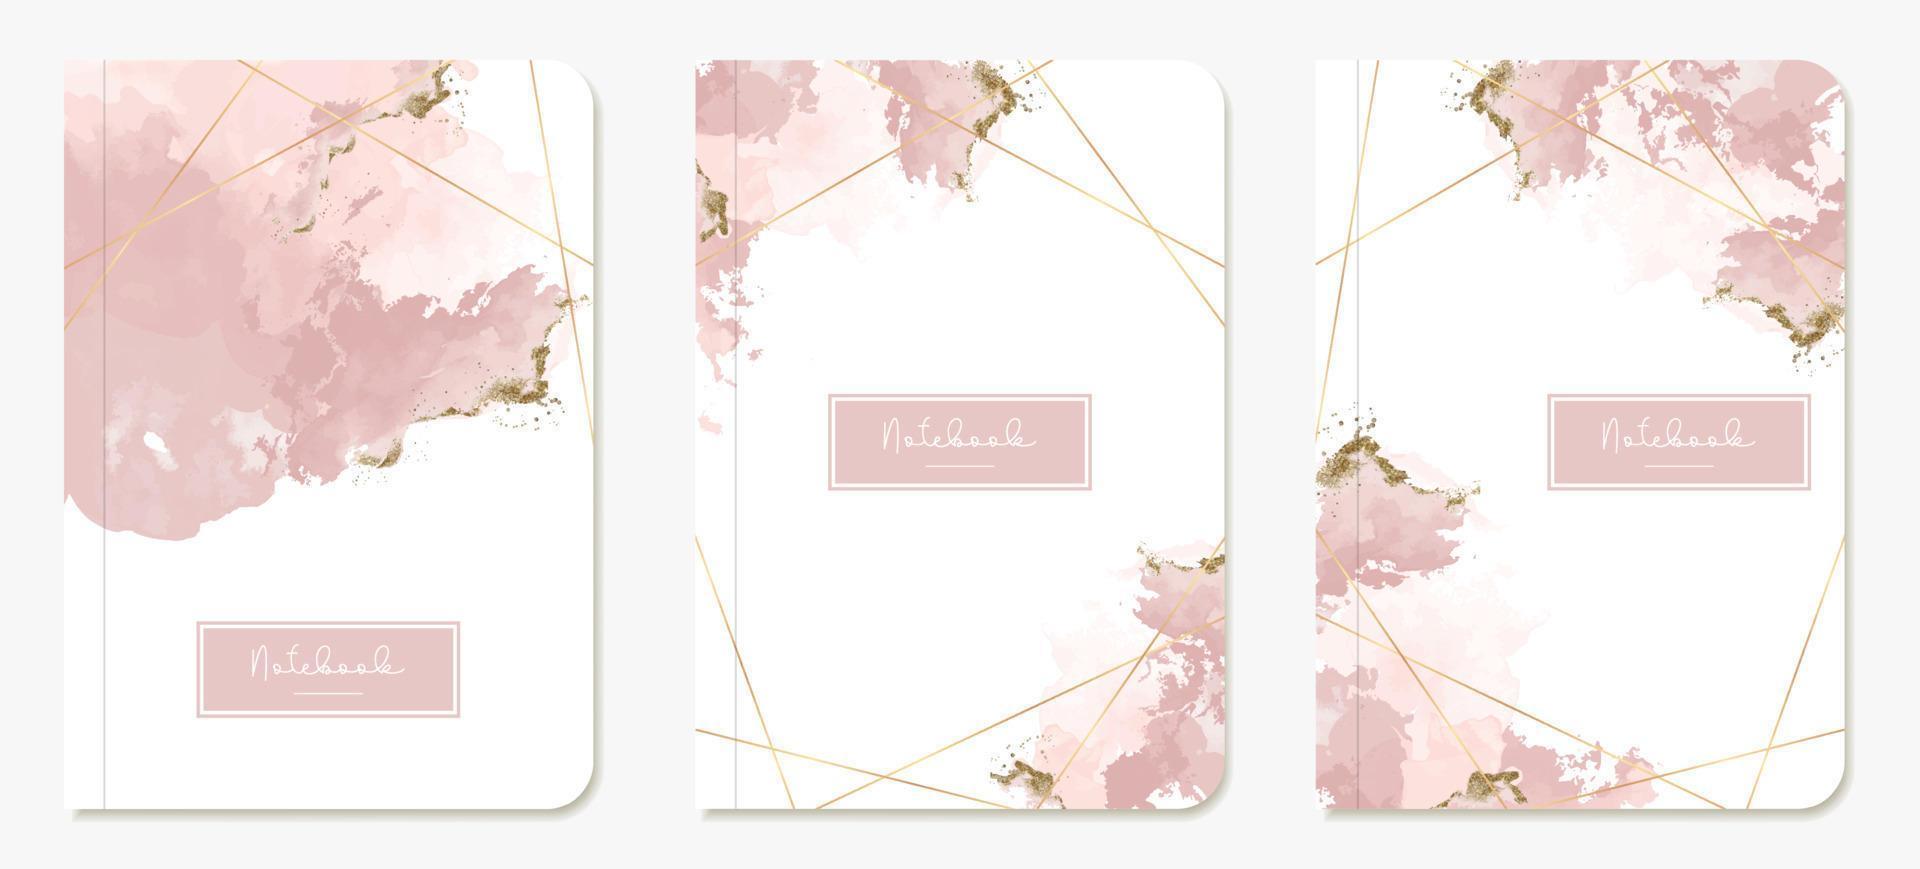 Layouts of notebooks with covers. Templates with watercolor stains with gold lines and glitter. Vector for diaries, diaries, catalogs, planners and flyers.